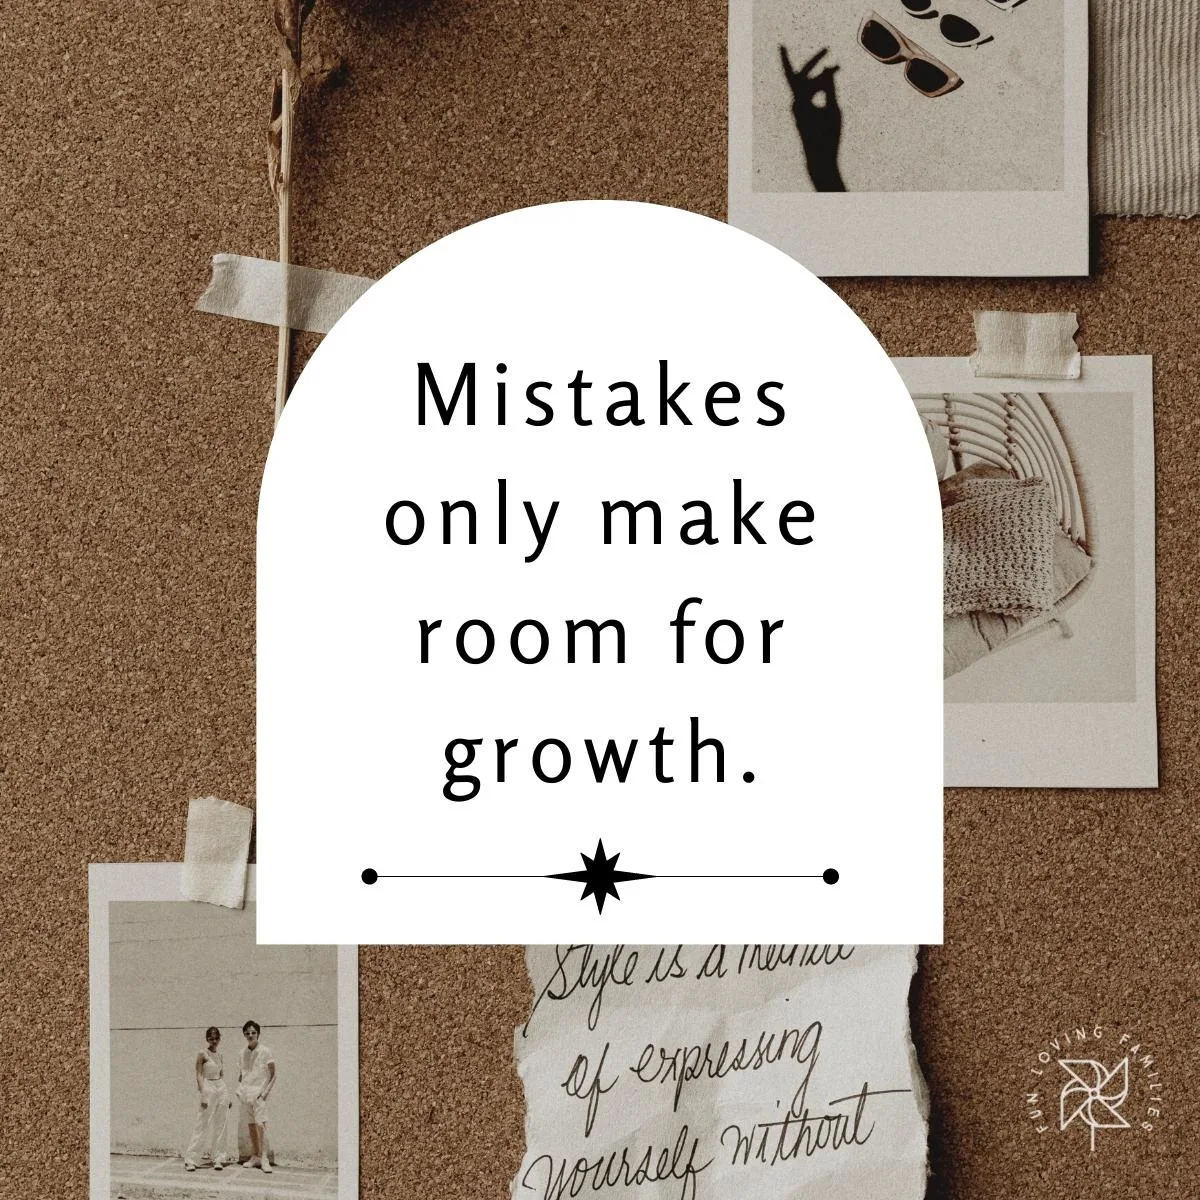 Mistakes only make room for growth affirmation